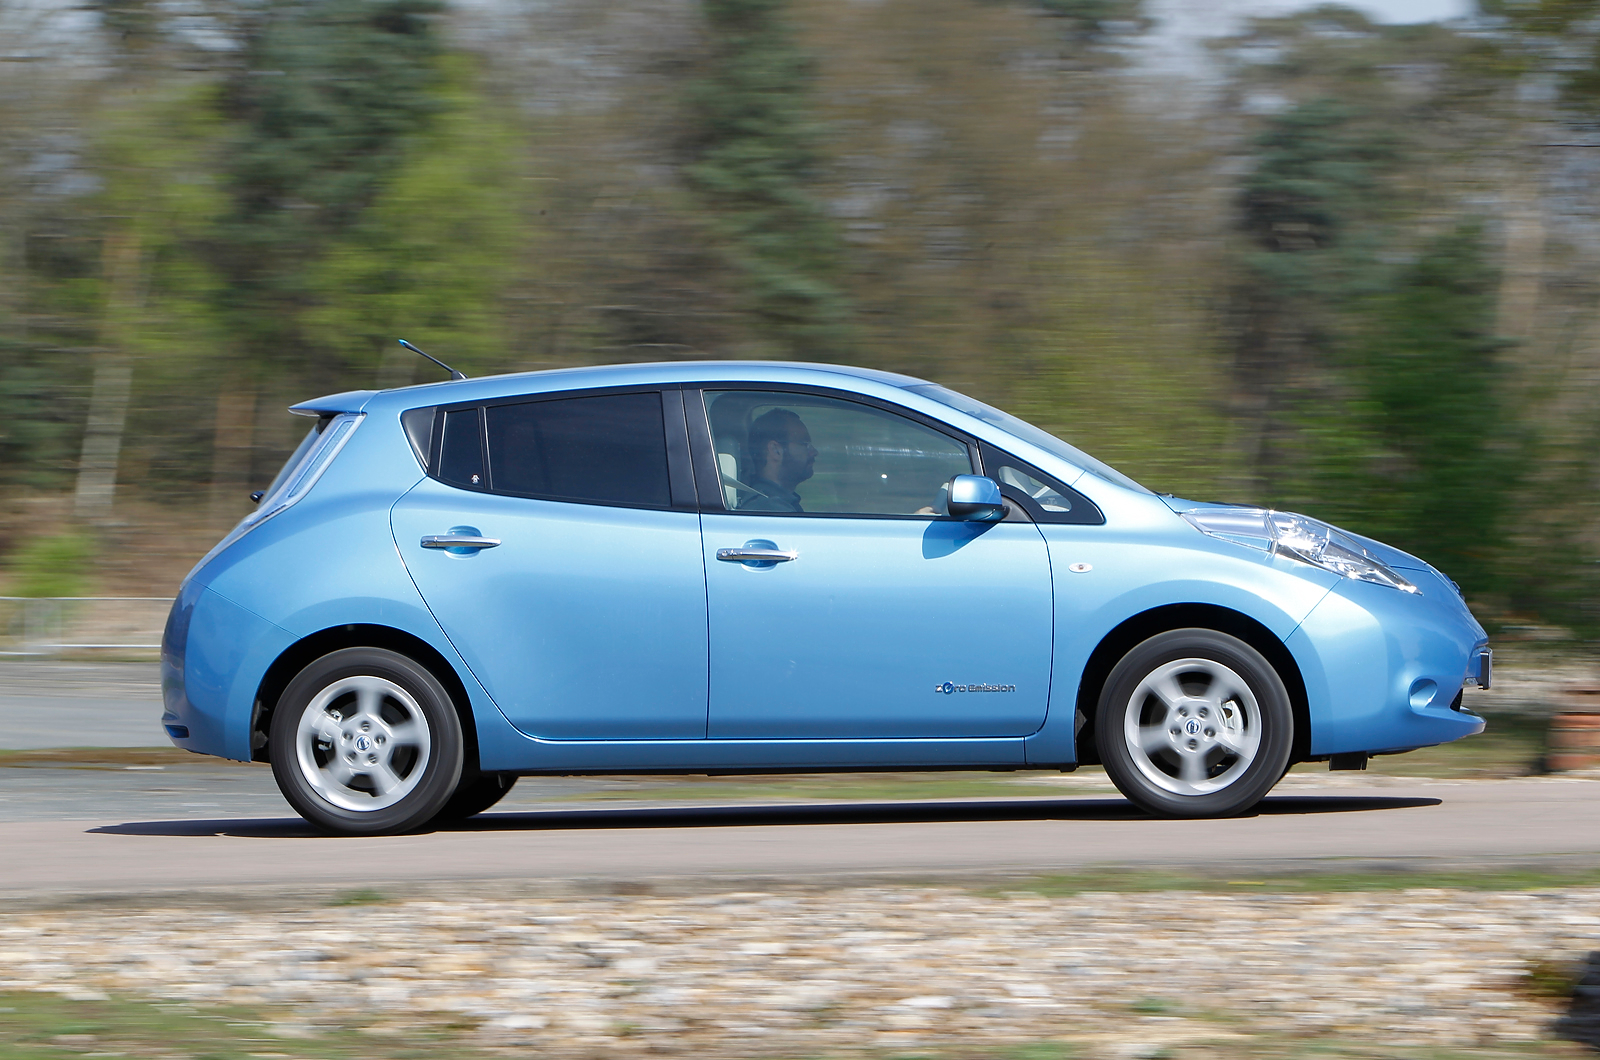 How much does a nissan leaf cost per mile #7